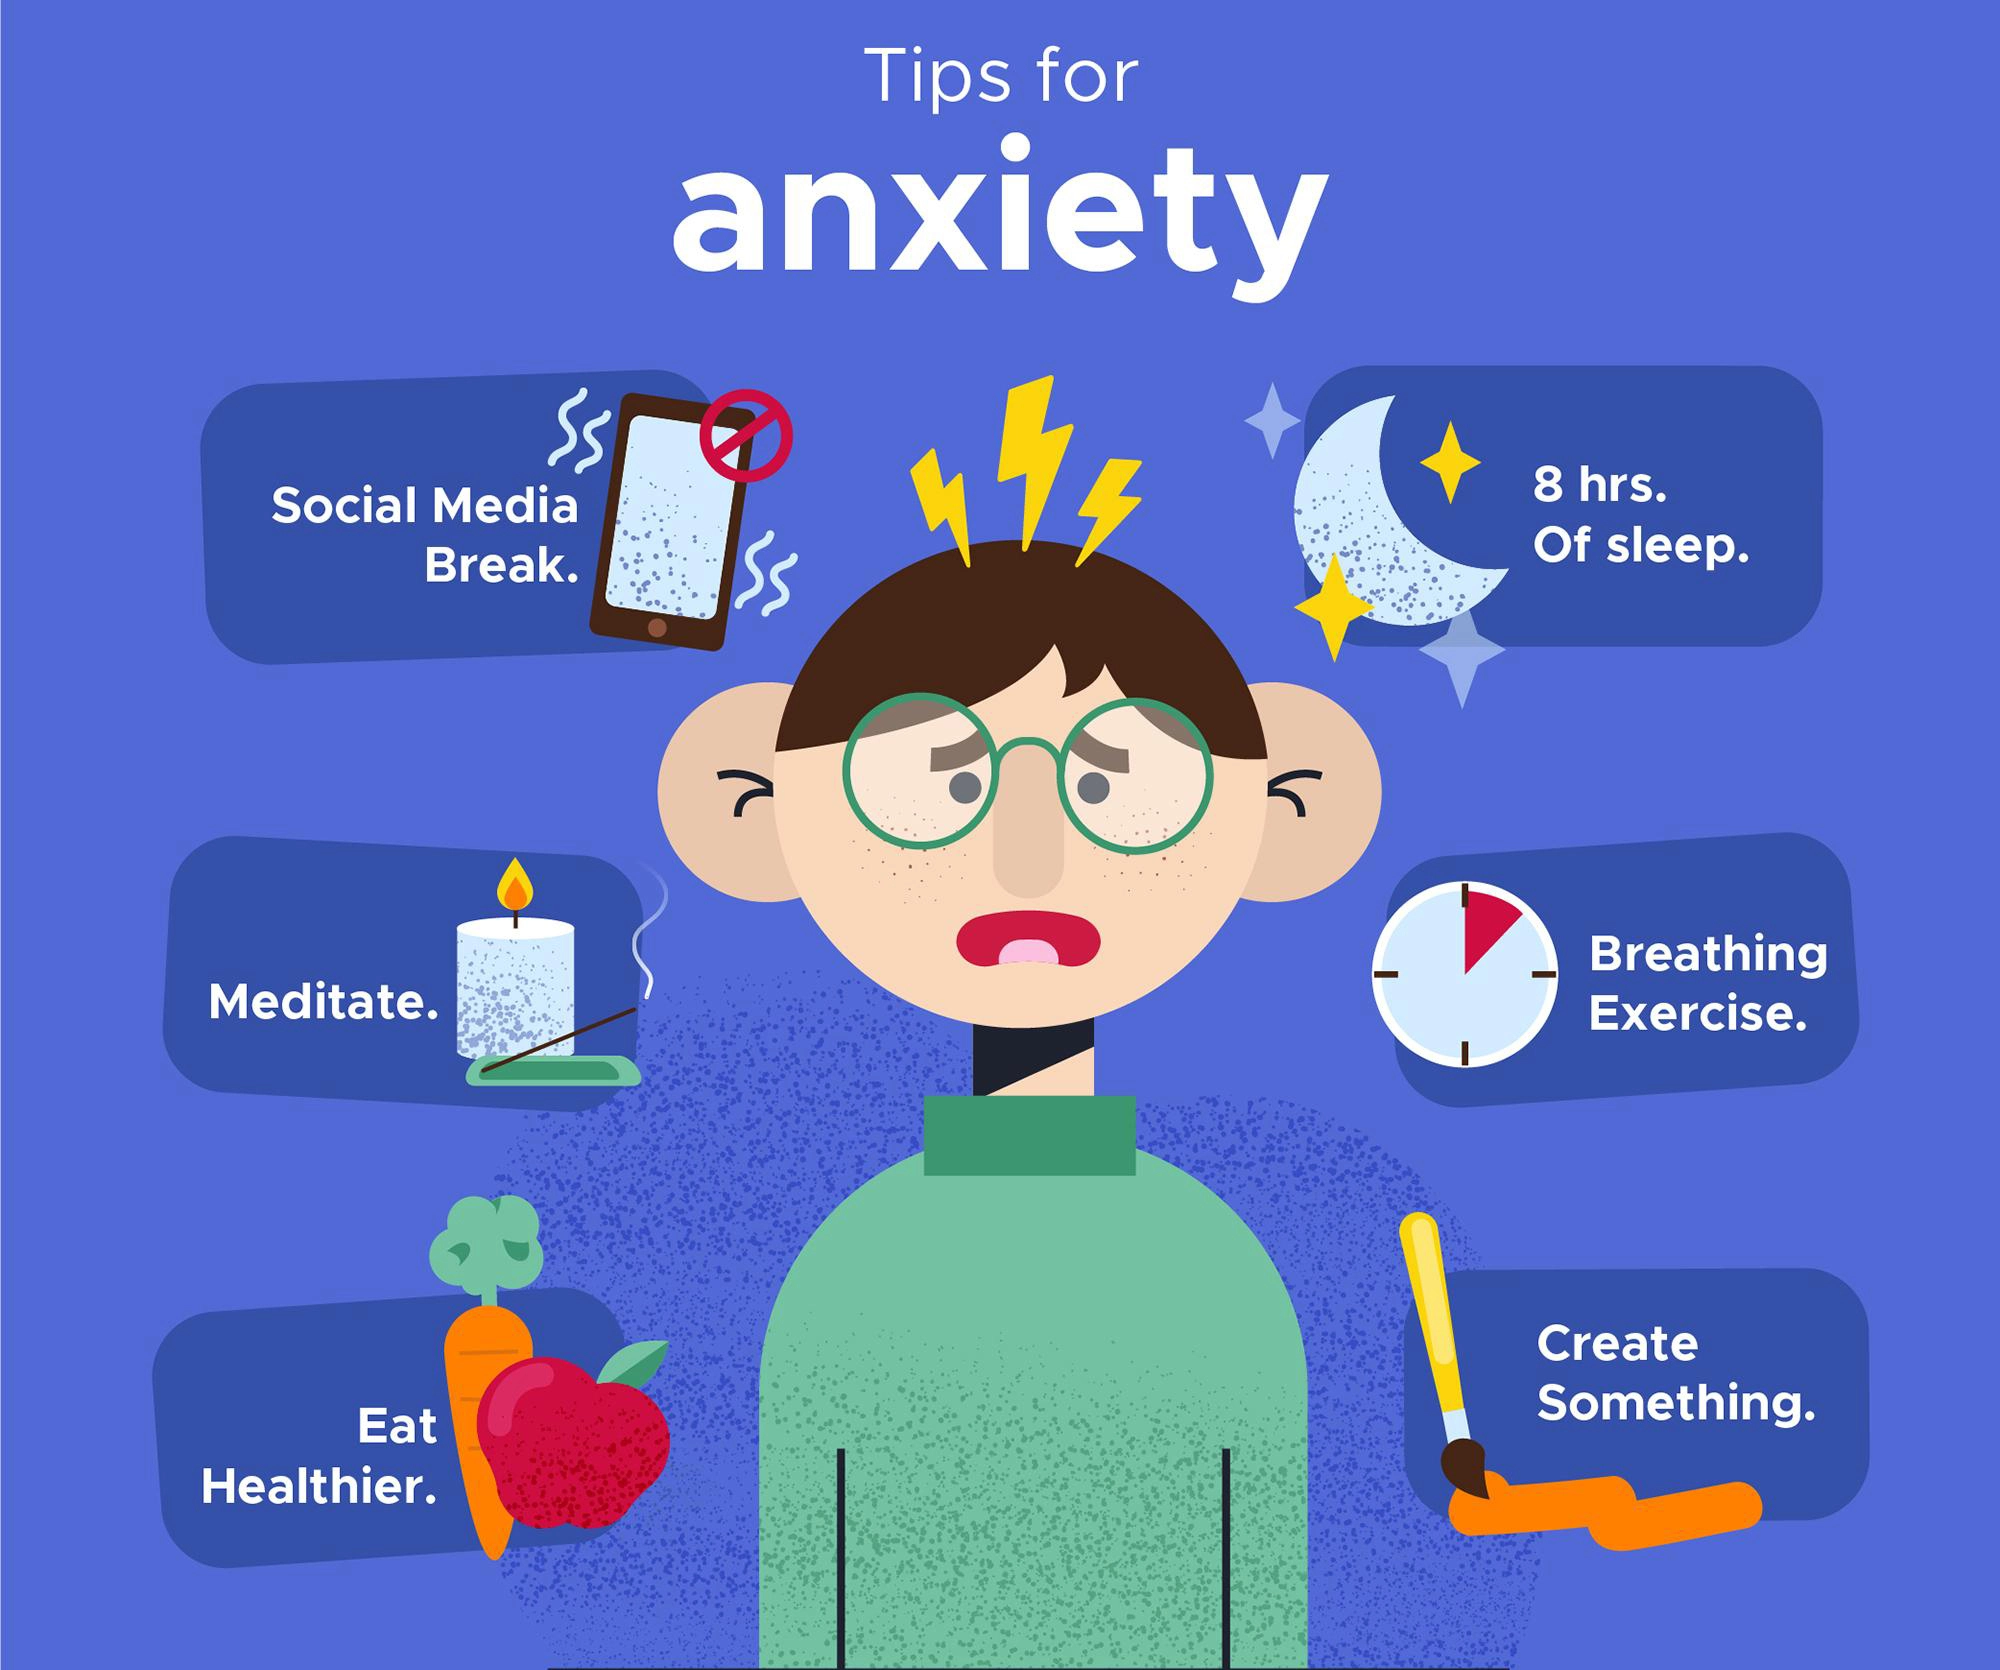 https://chatgptbotsai.com/images/effective-Ways-to-Reduce-Stress-and-Anxiety